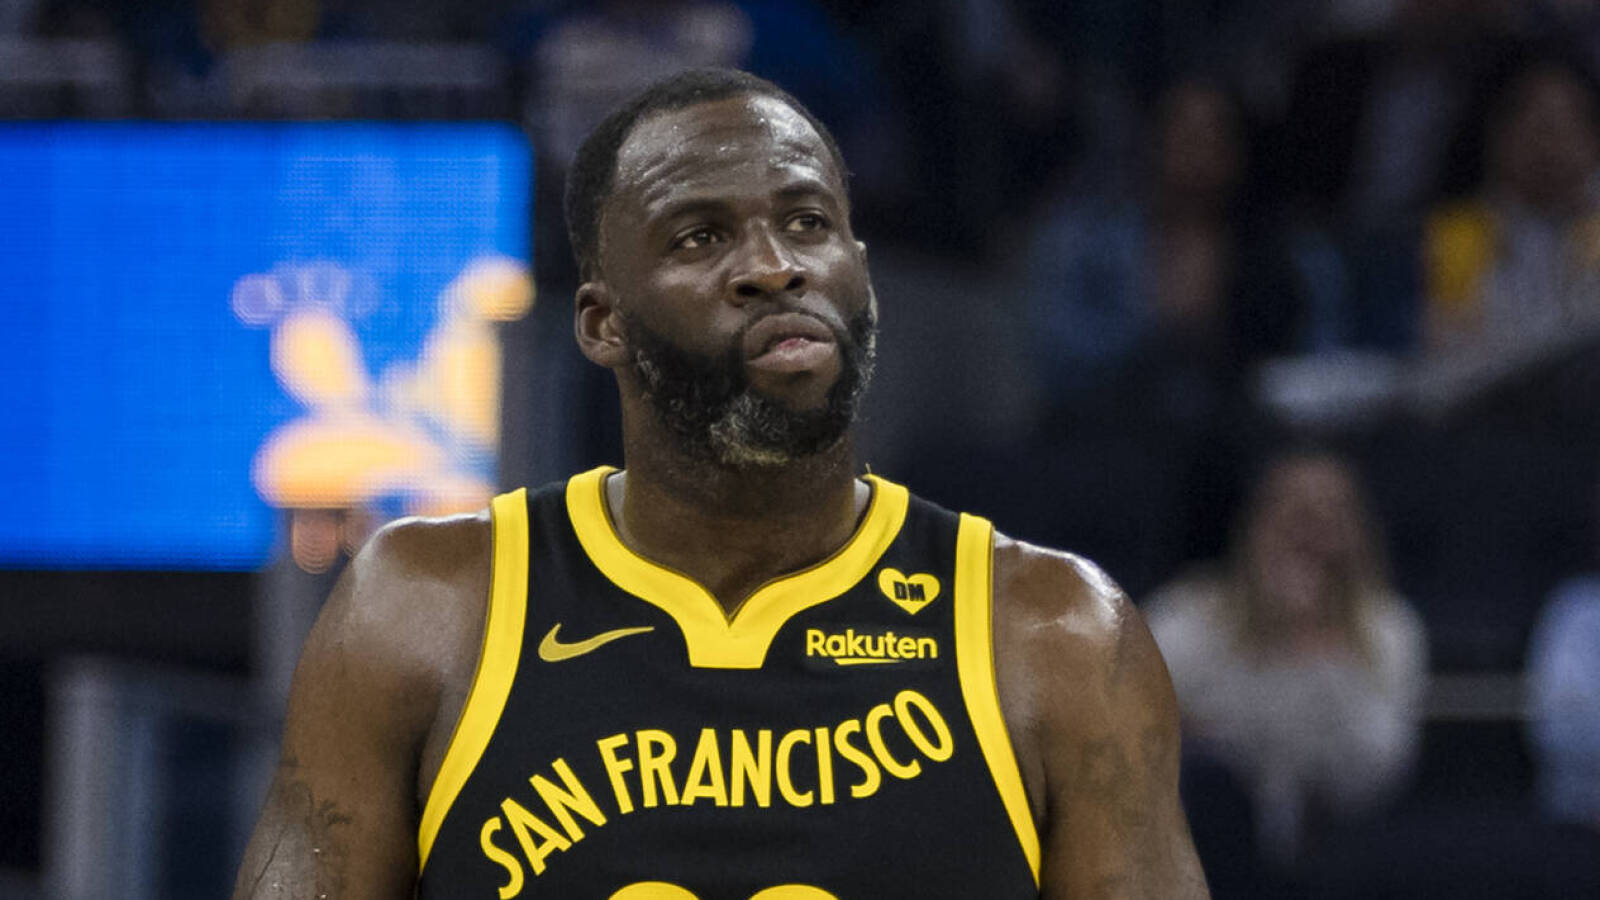 Draymond Green explains what happened with his latest ejection